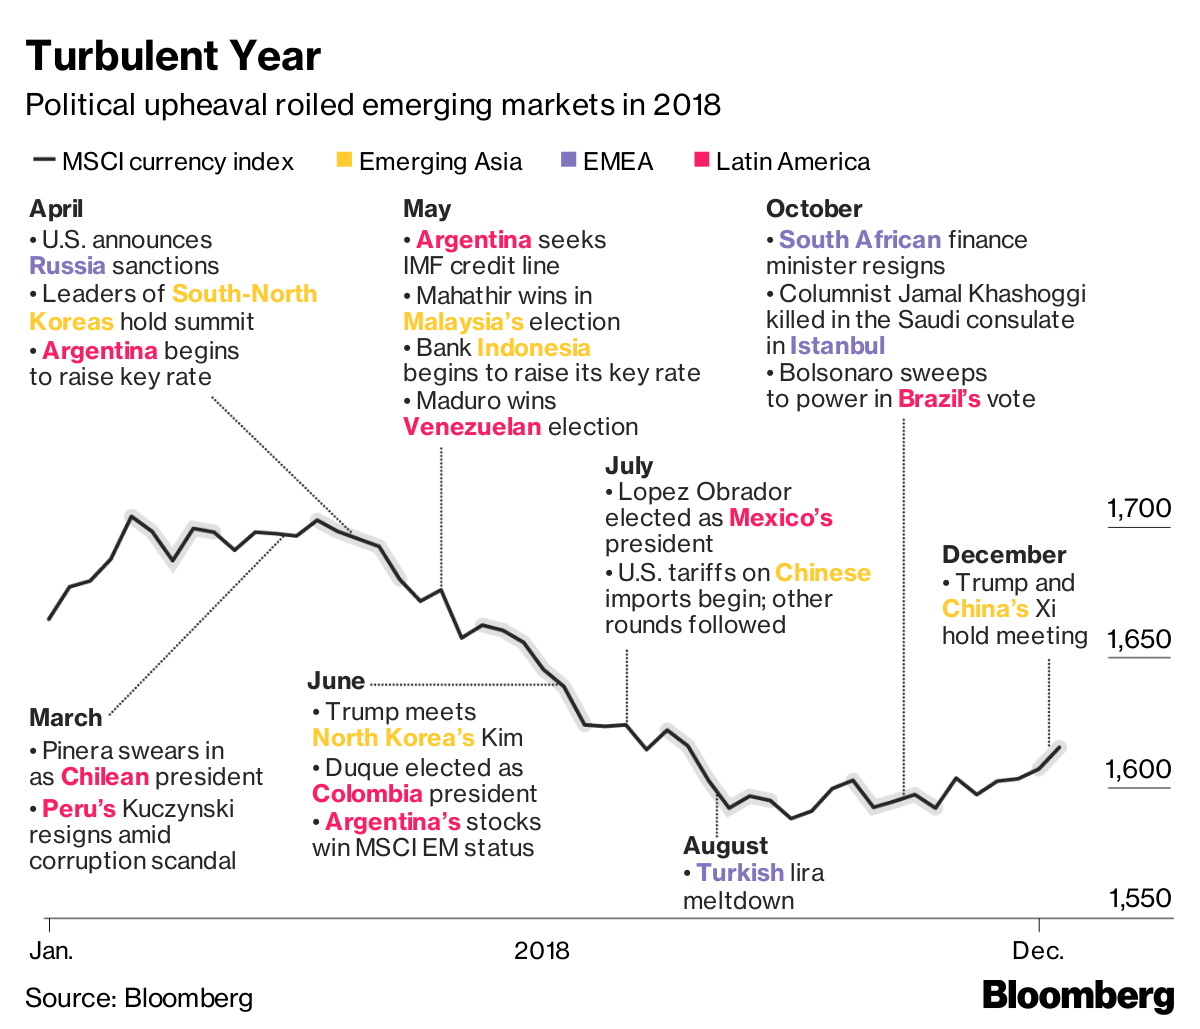 Emerging Markets and Turbulent Markets